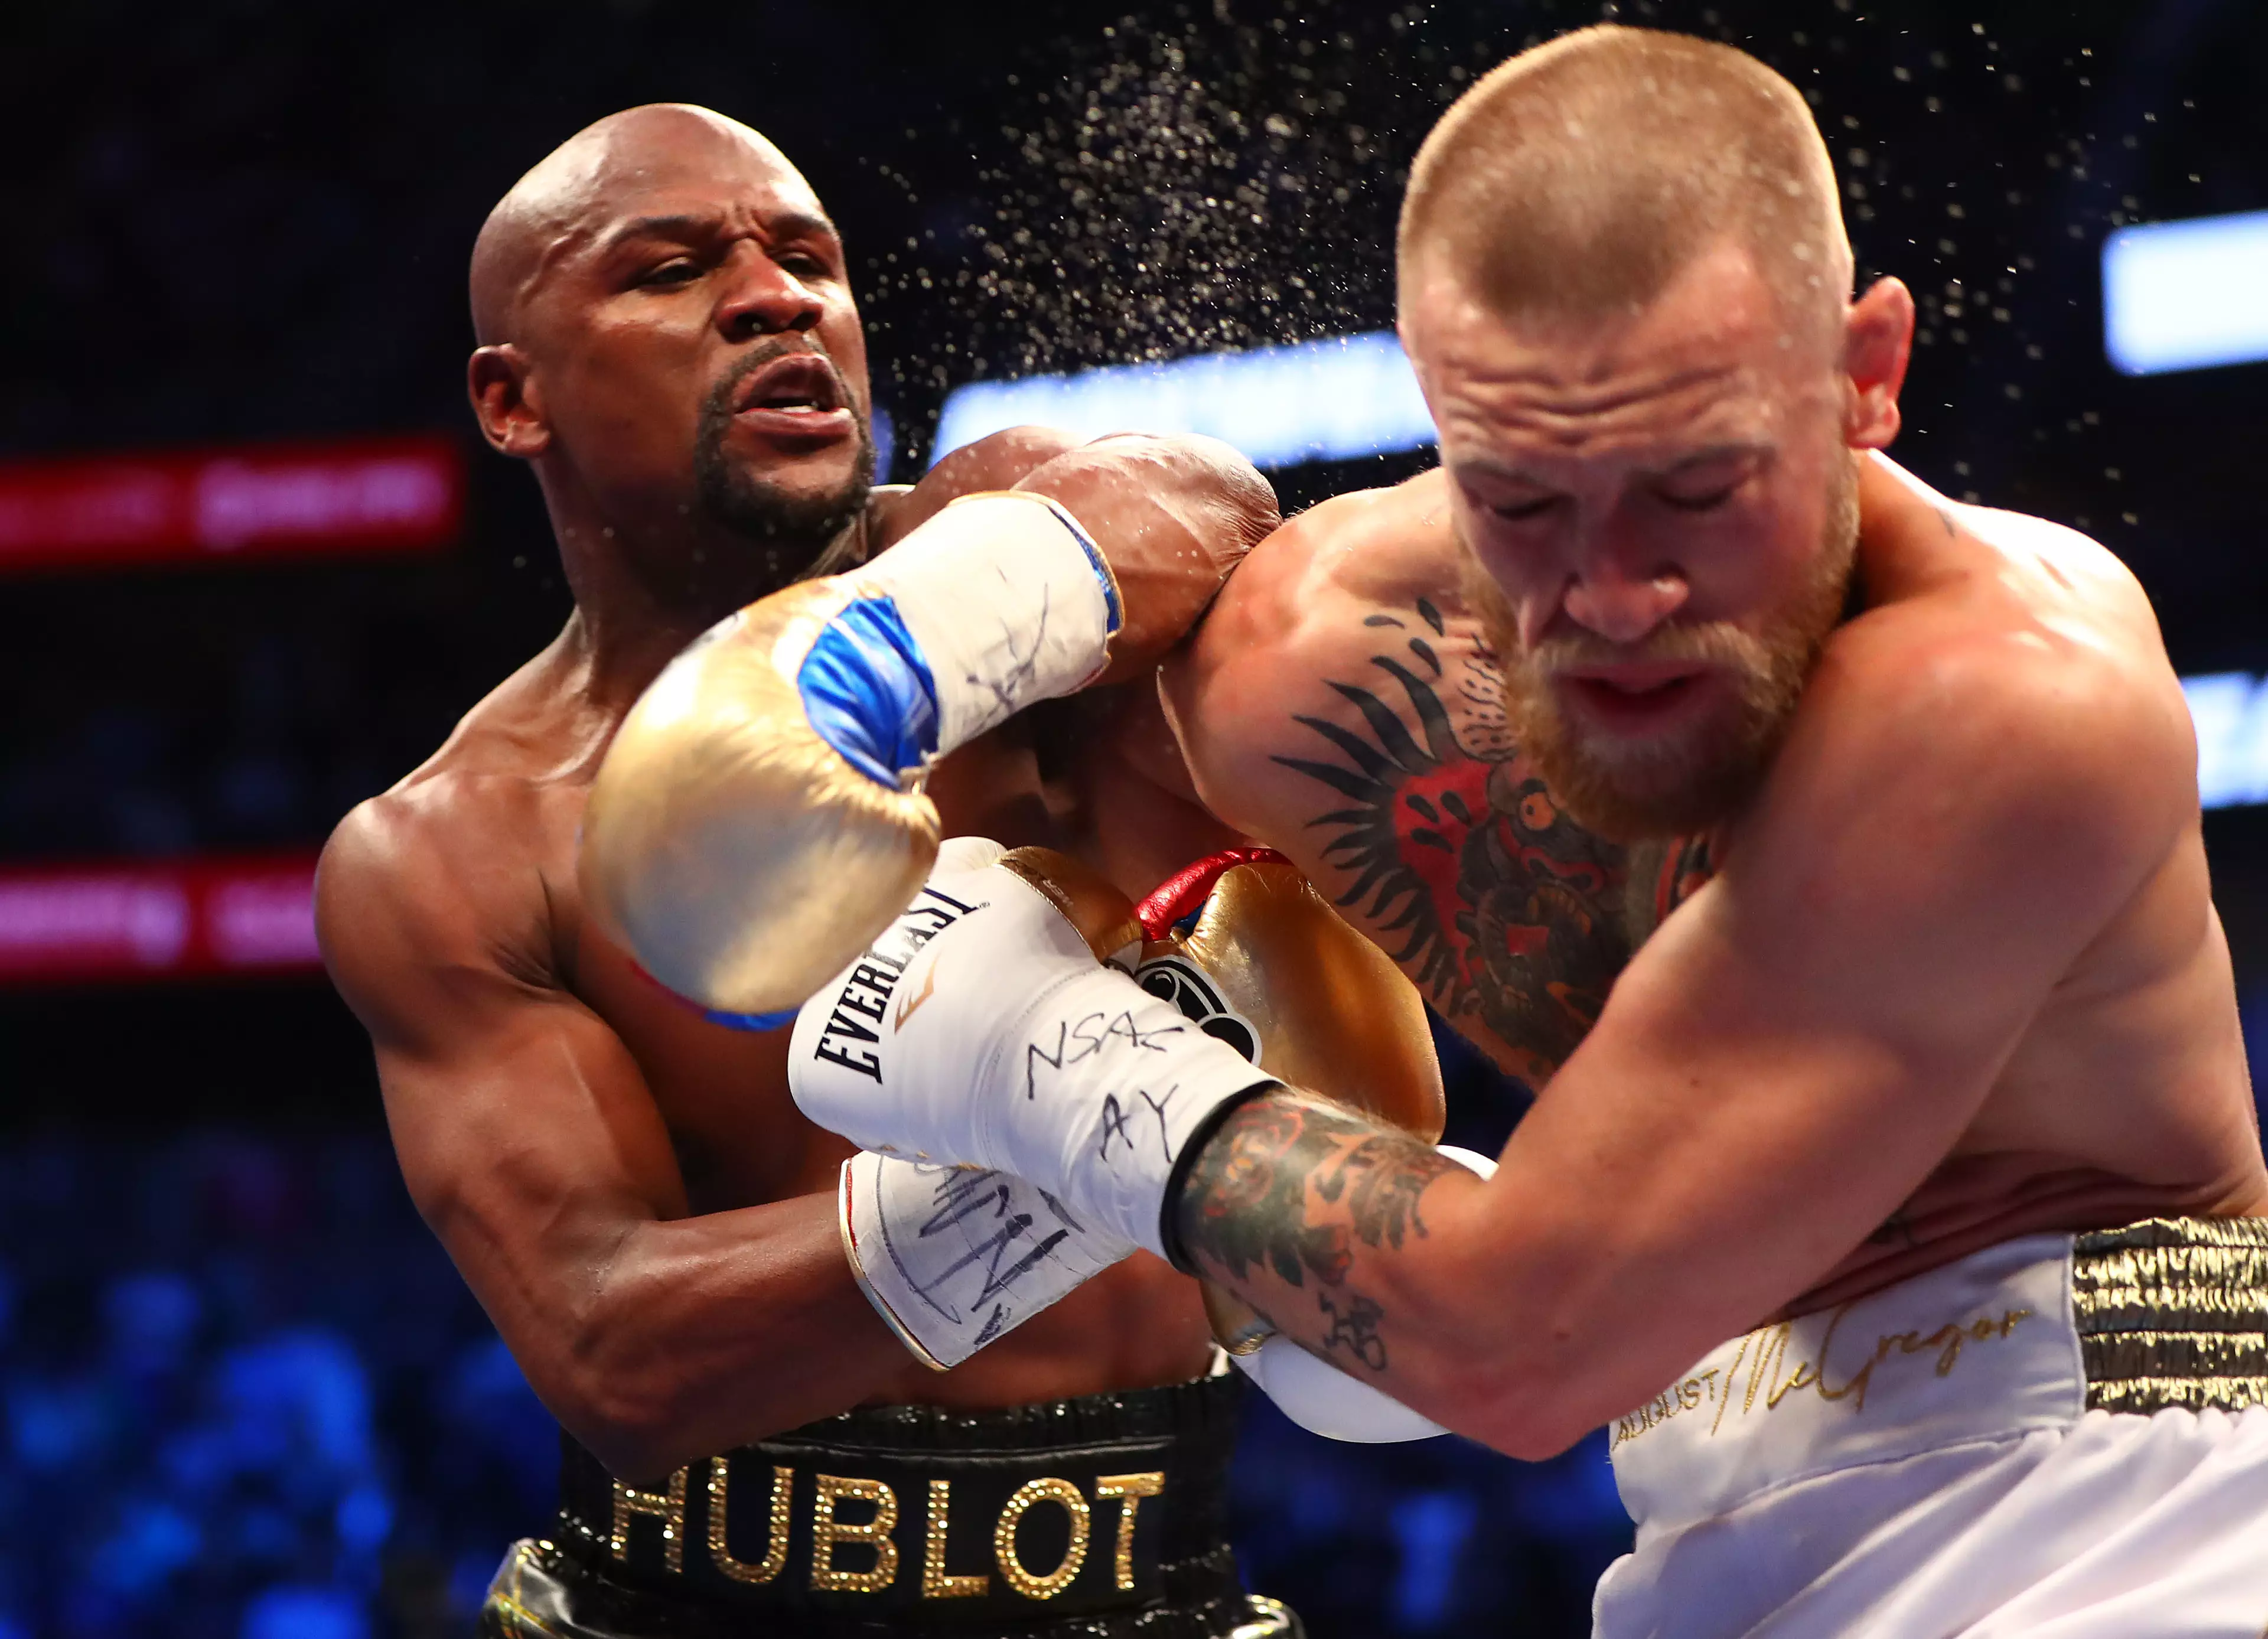 Mayweather vs McGregor was the highest Pay Per View sporting event in history.